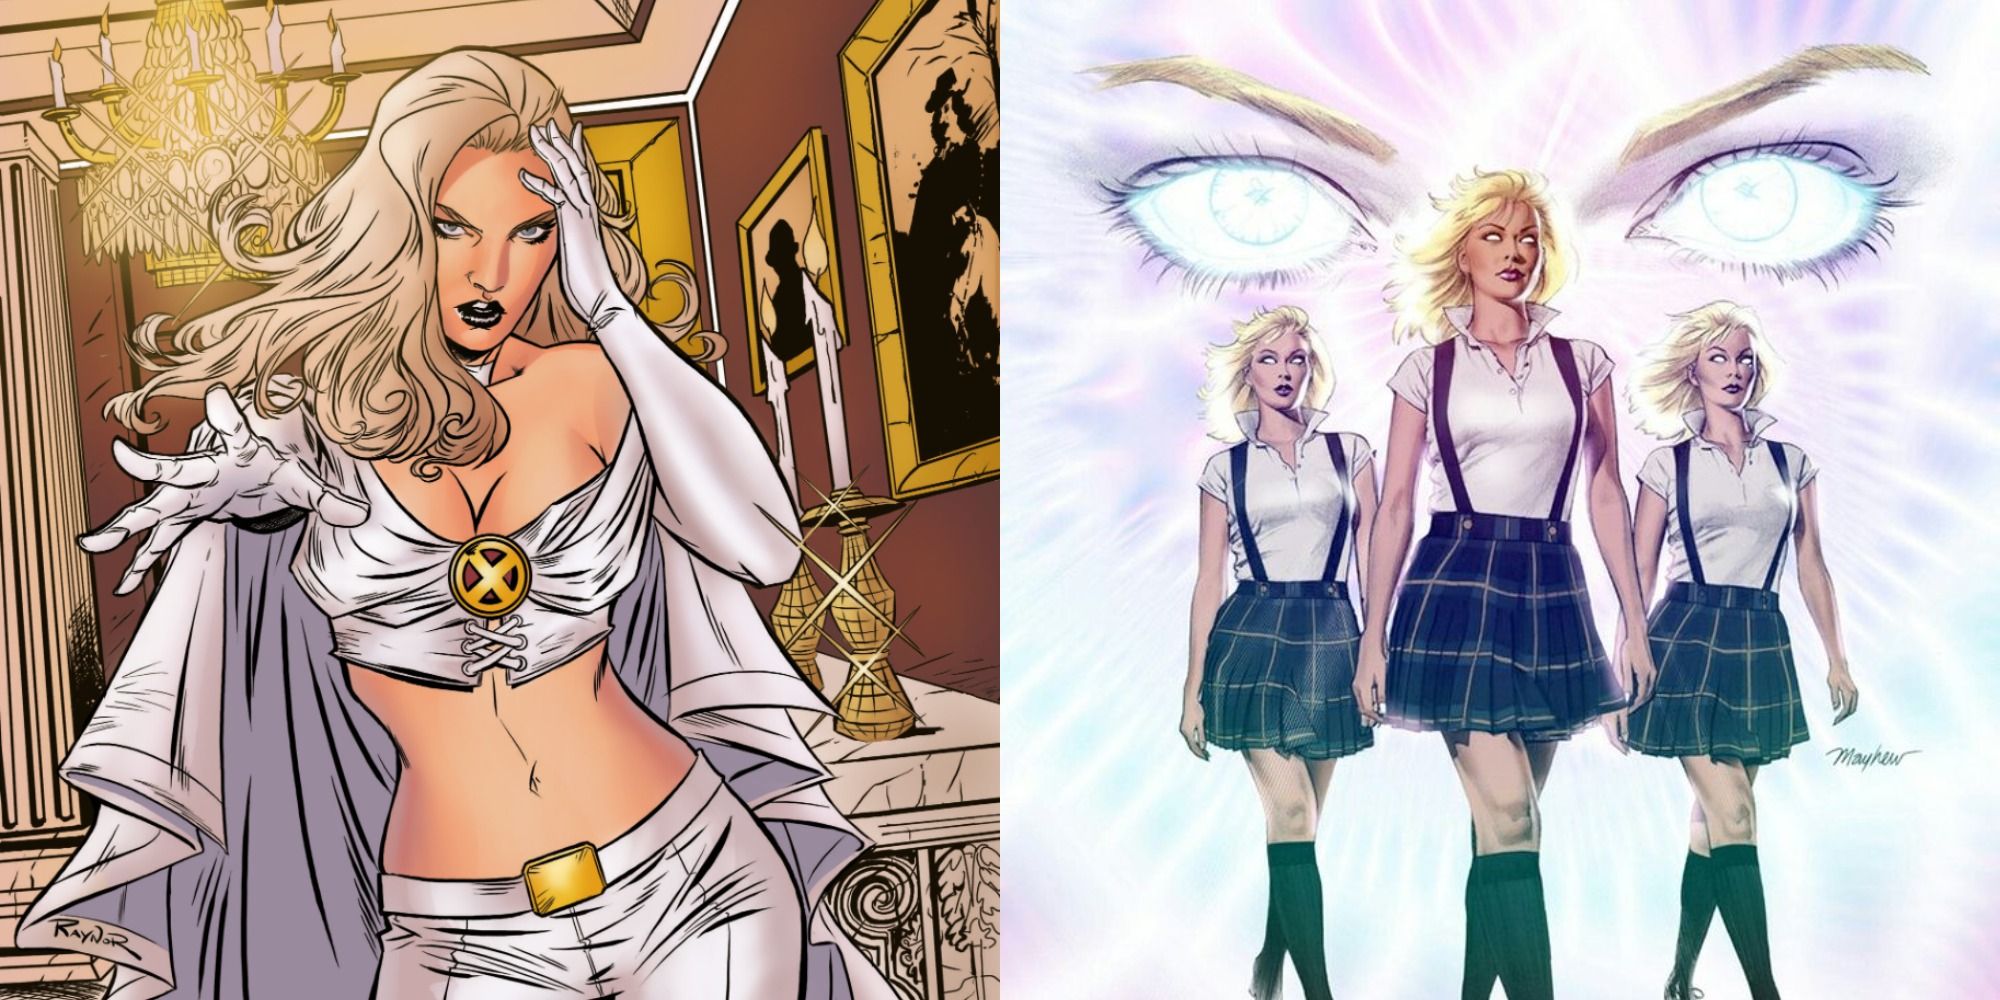 side by side images of mutants Emma Frost and her clones The Stepford Cuckoos in Marvel Comics